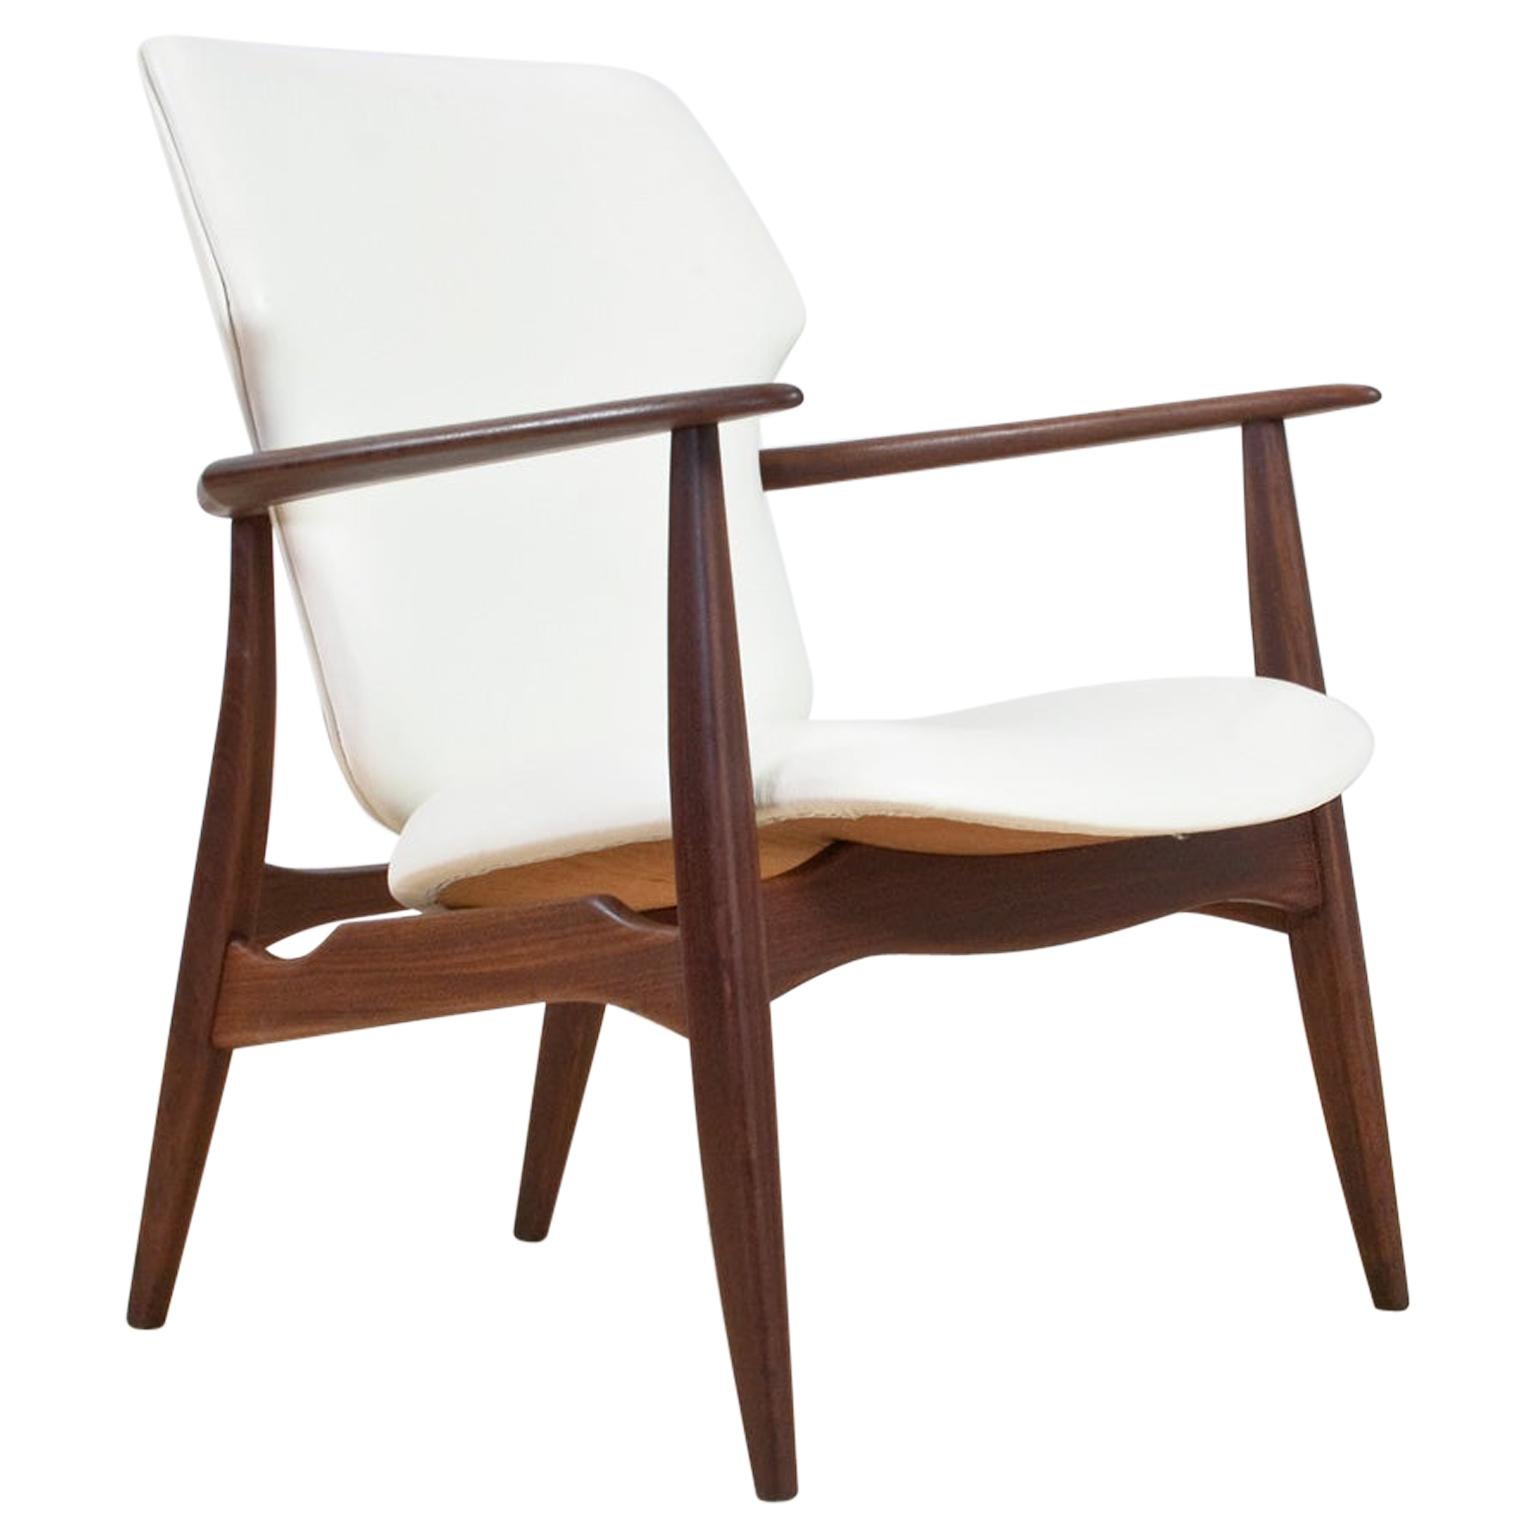 Mid-Century Modern Chair in Teak and White Leather by Aksel Bender Madsen, 1960s